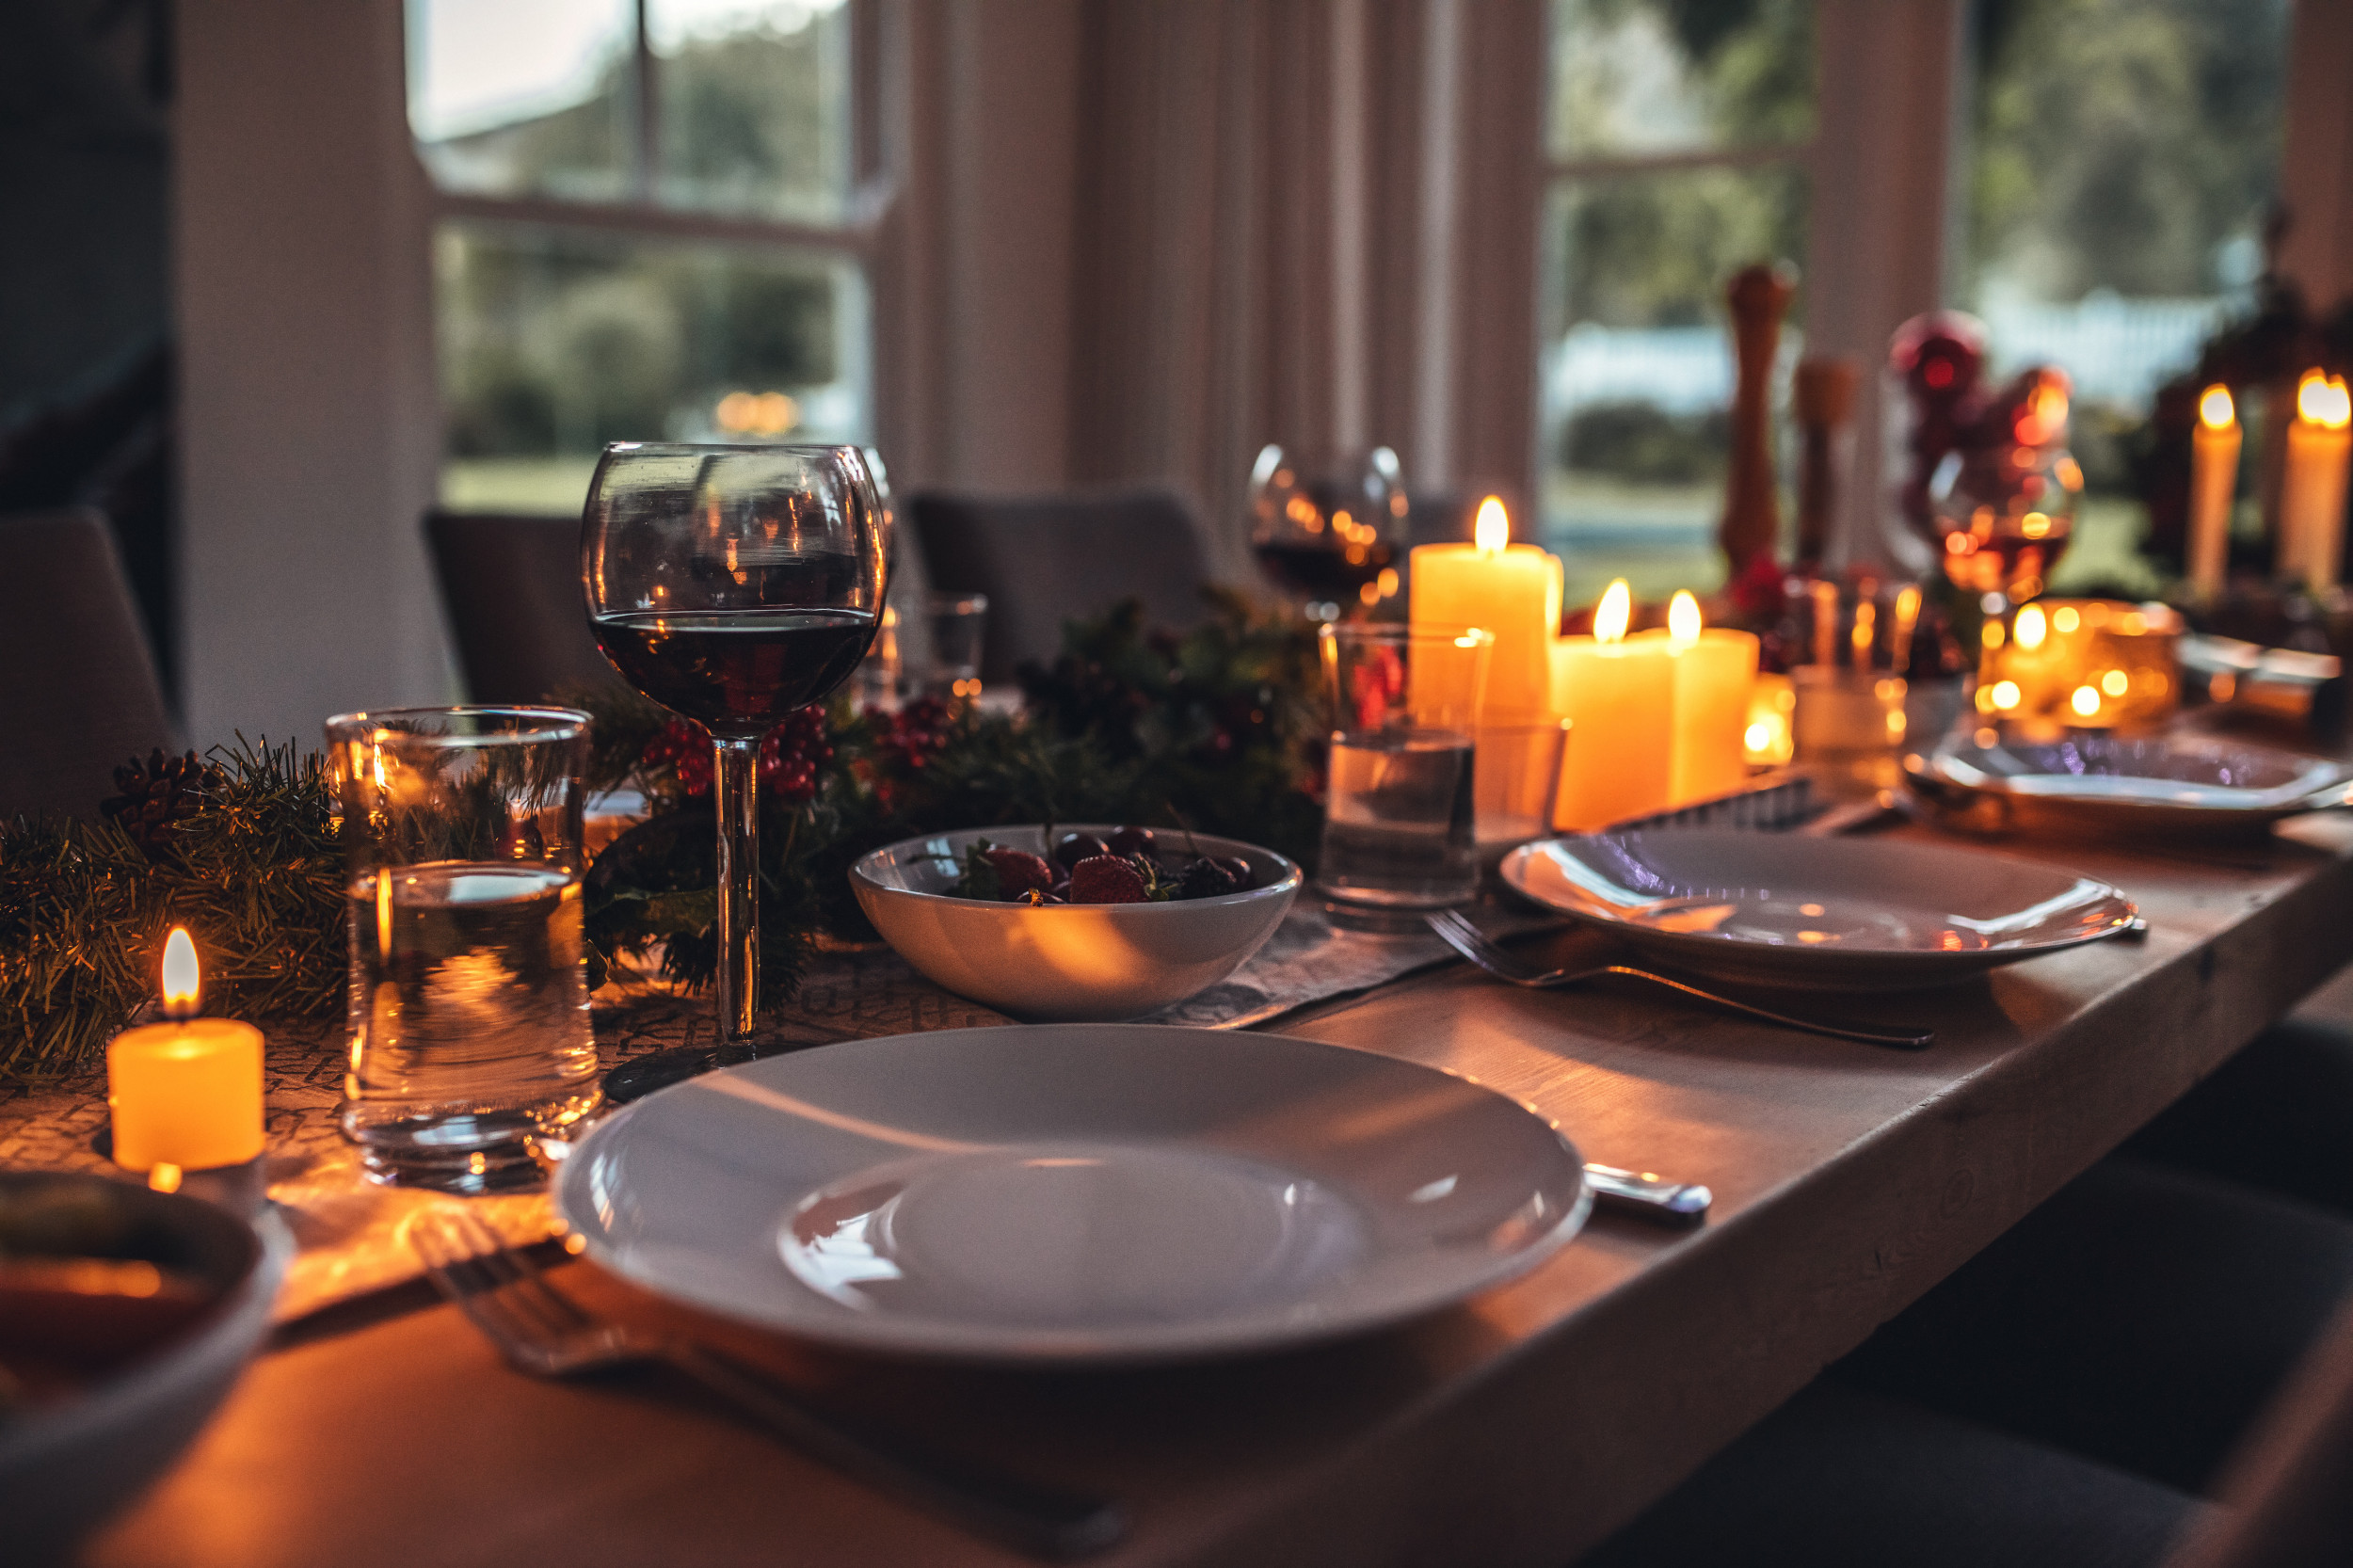 How to Set a Table for Thanksgiving in 3 Easy Steps